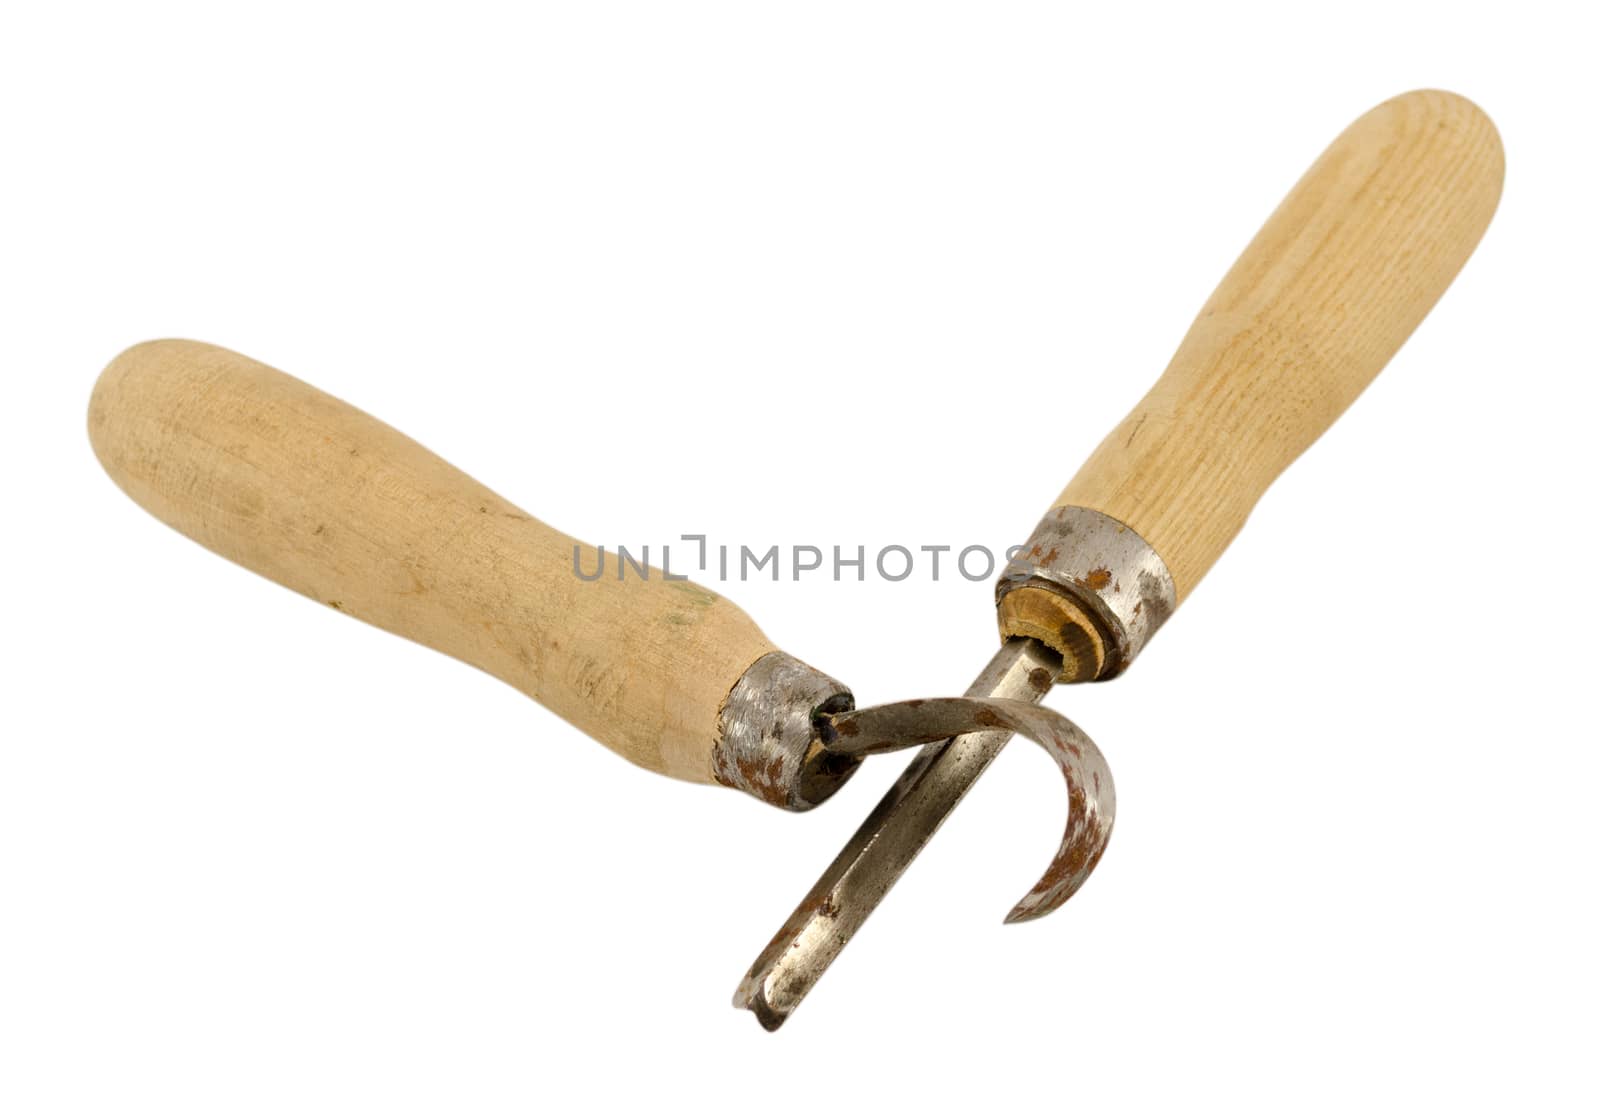 pair retro rusty chisel graver carve tools with wooden handles isolated on white background.